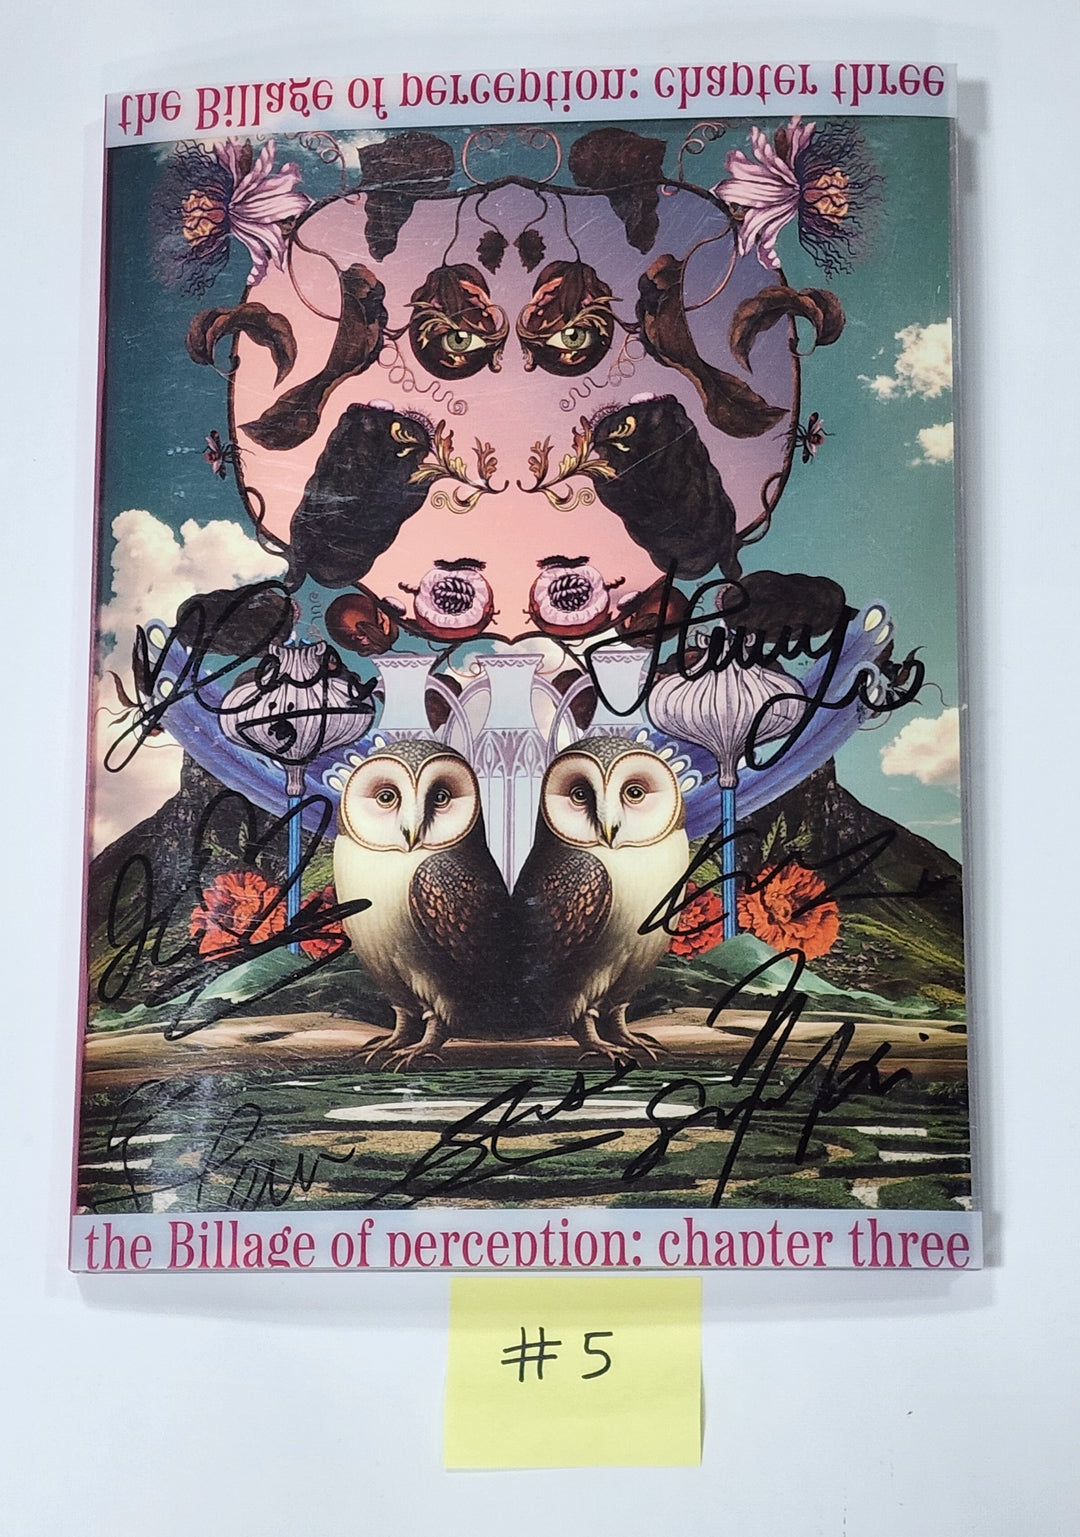 Billlie "the Billage of perception: chapter three" Mini 4th - Hand Autographed(Signed) Promo Album